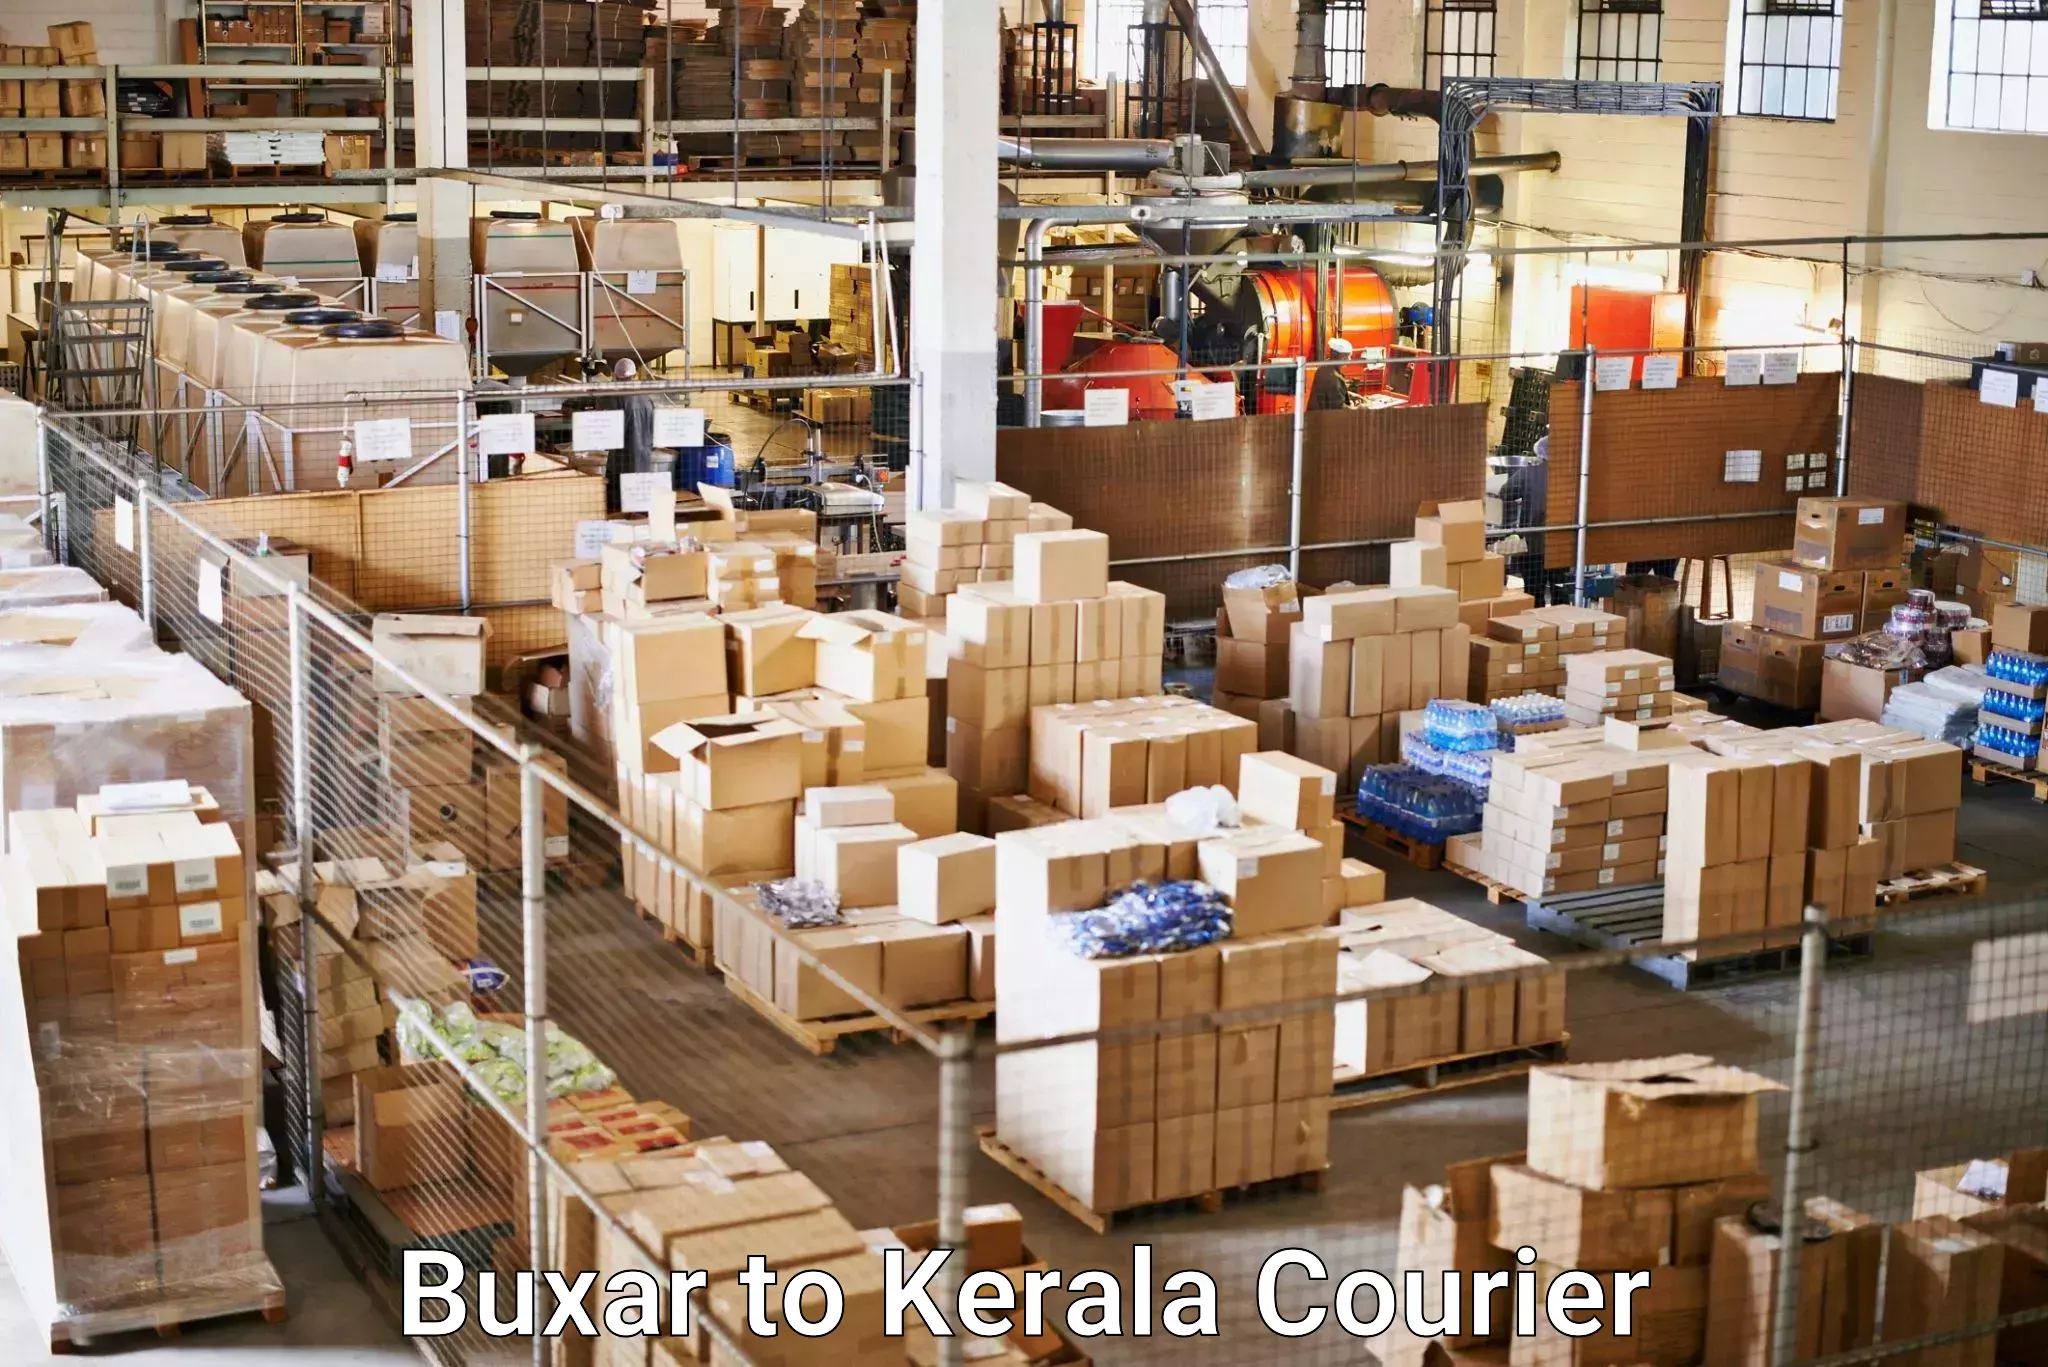 Express package services Buxar to Kozhikode